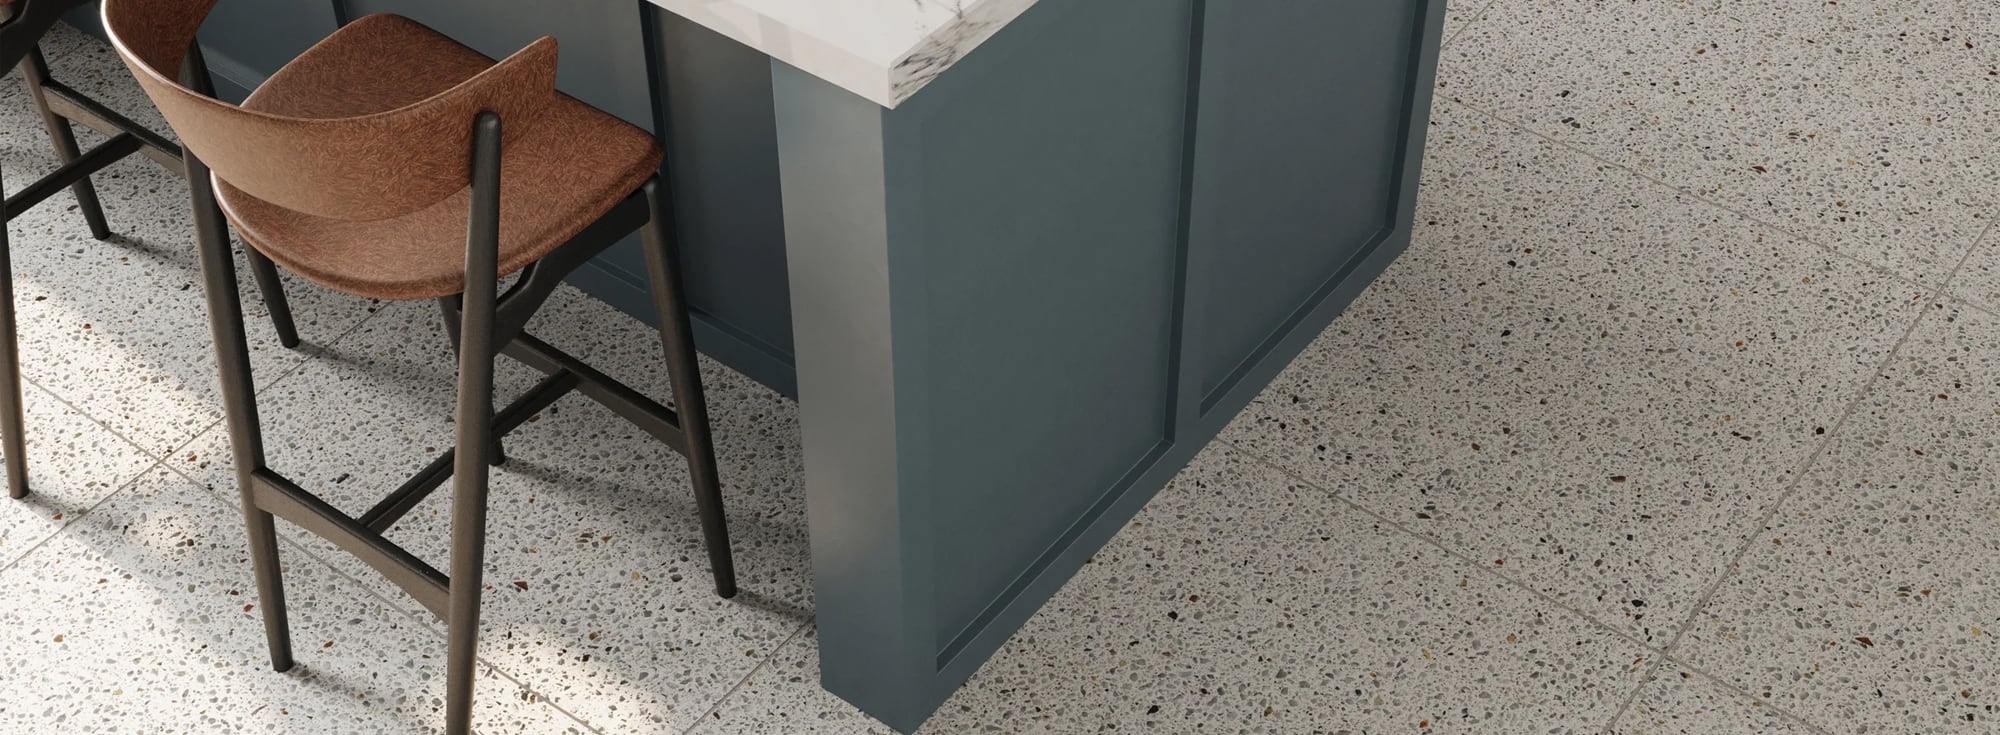 Trendy terrazzo look tile flooring adding speckled charm to a contemporary kitchen